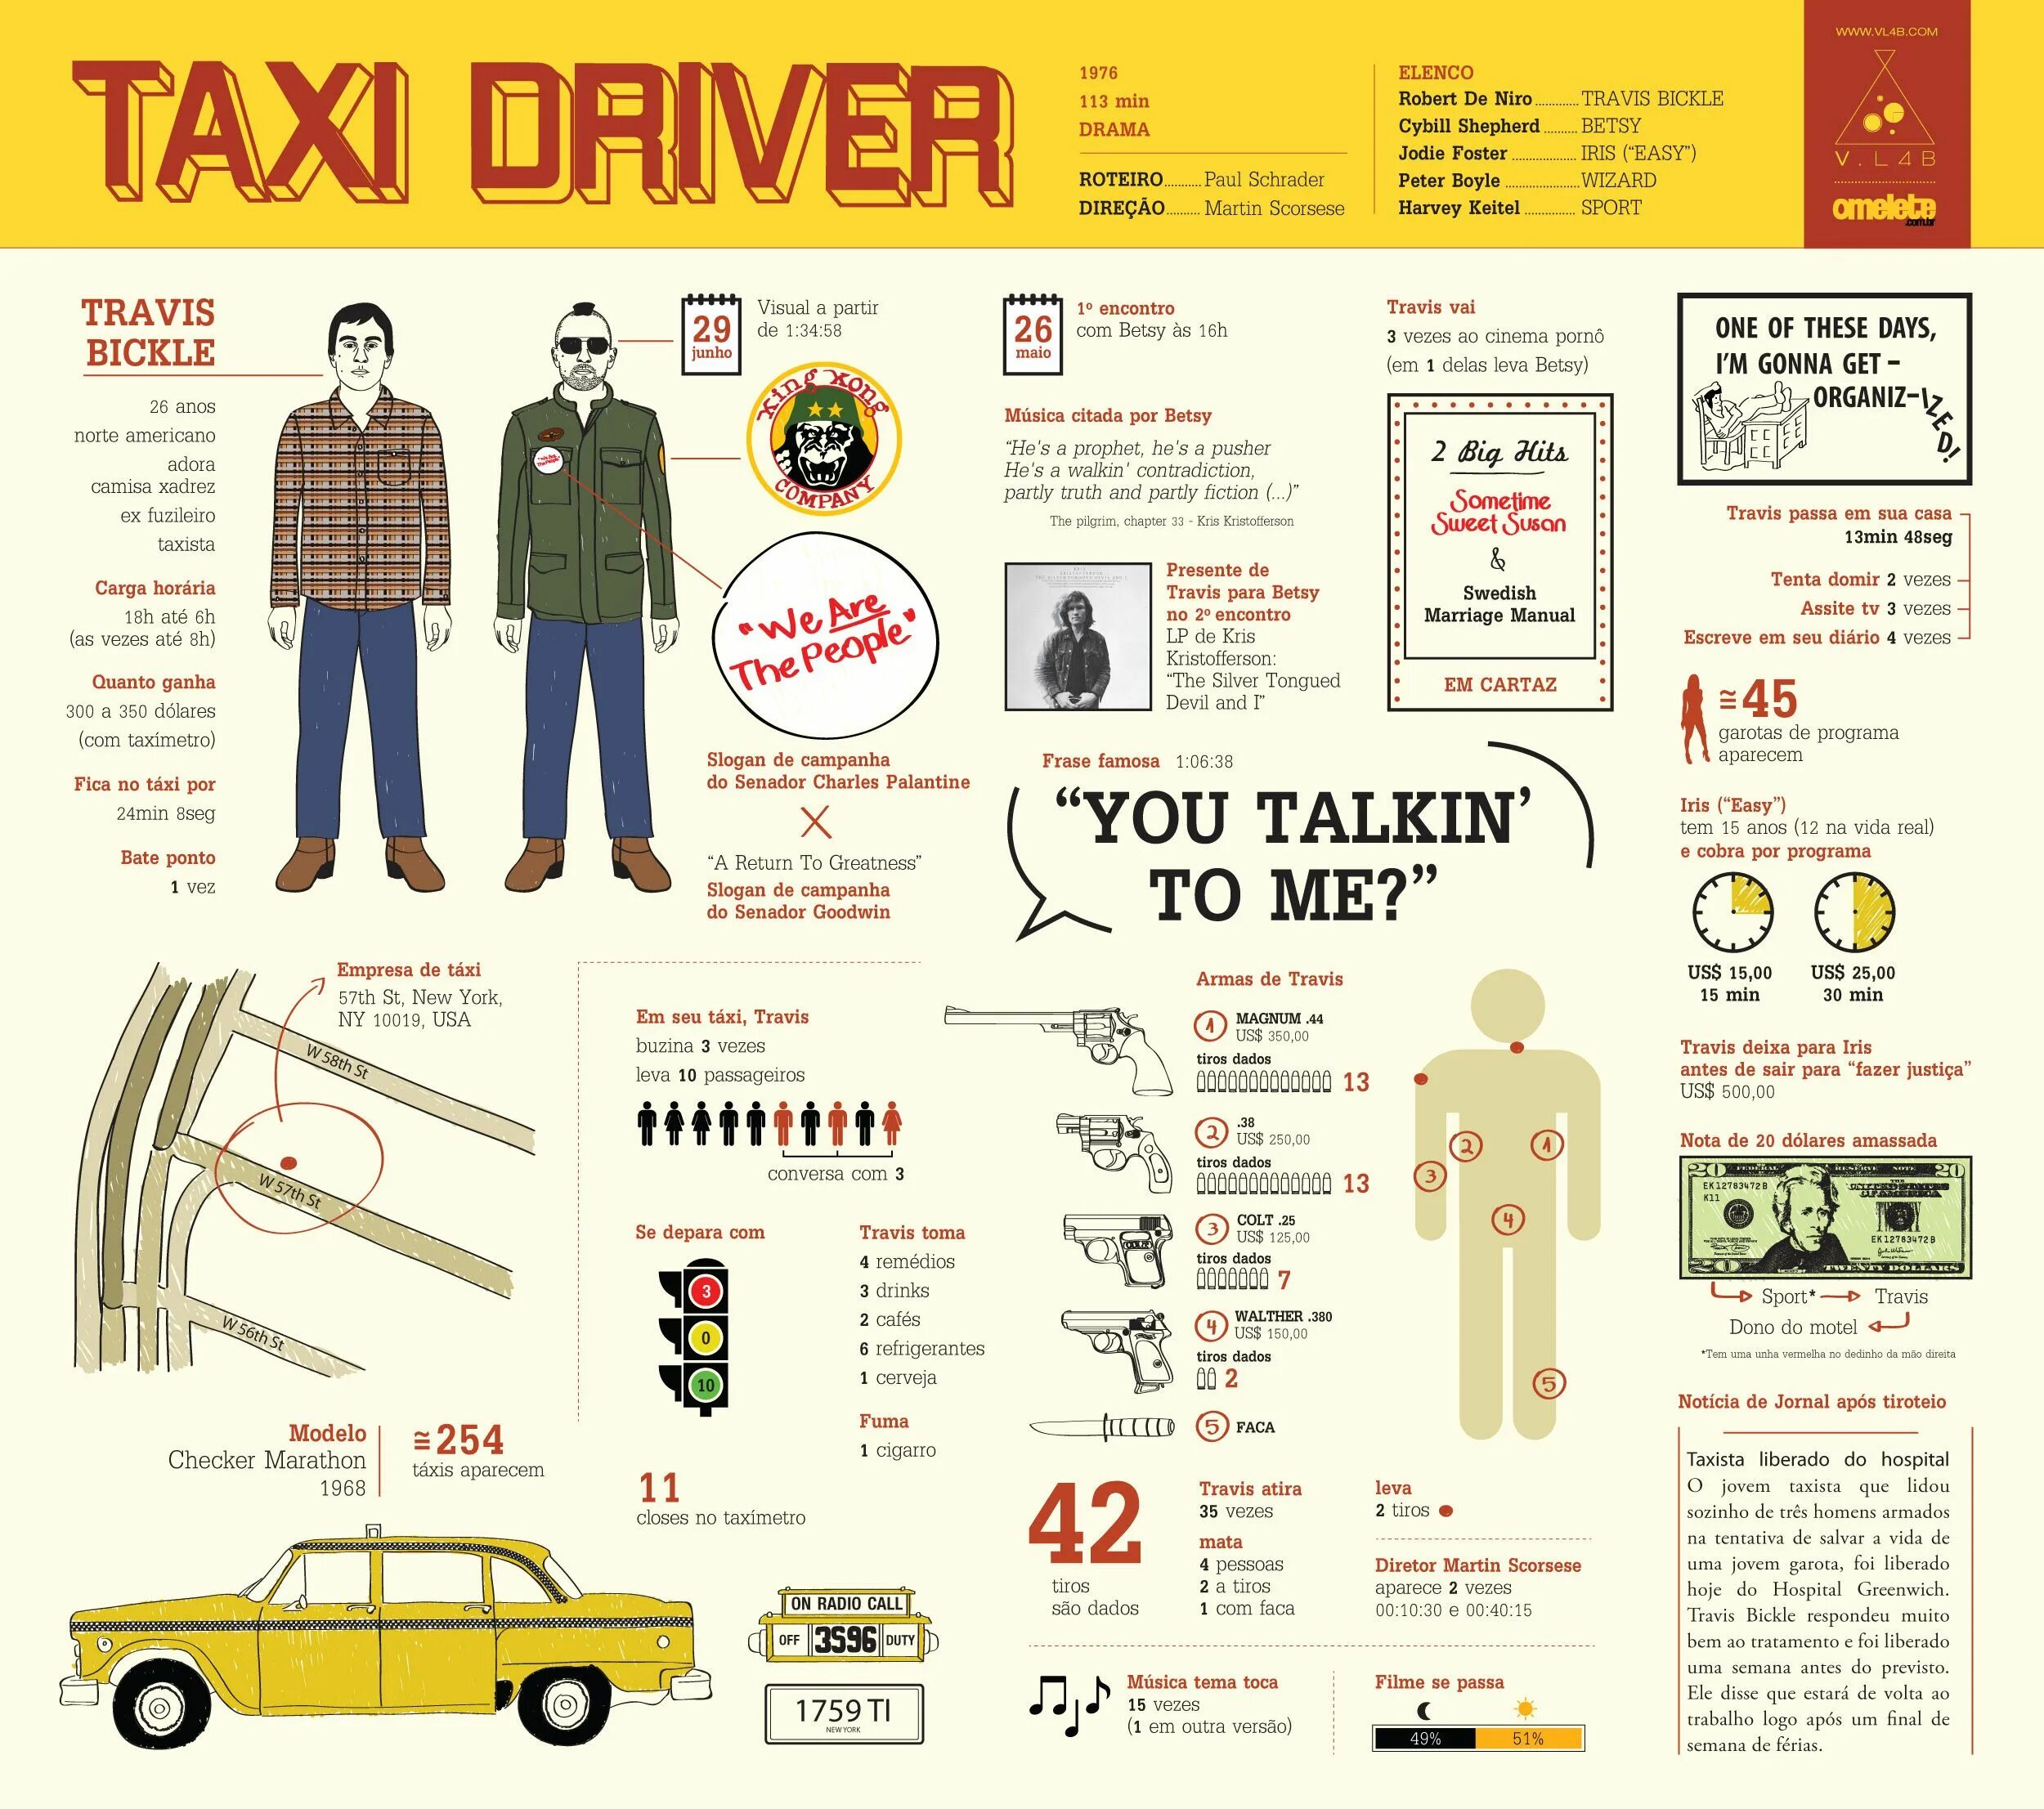 Taxi Driver 1976. Таксист Постер. Taxi Driver Betsy. Peter Boyle Taxi Driver.